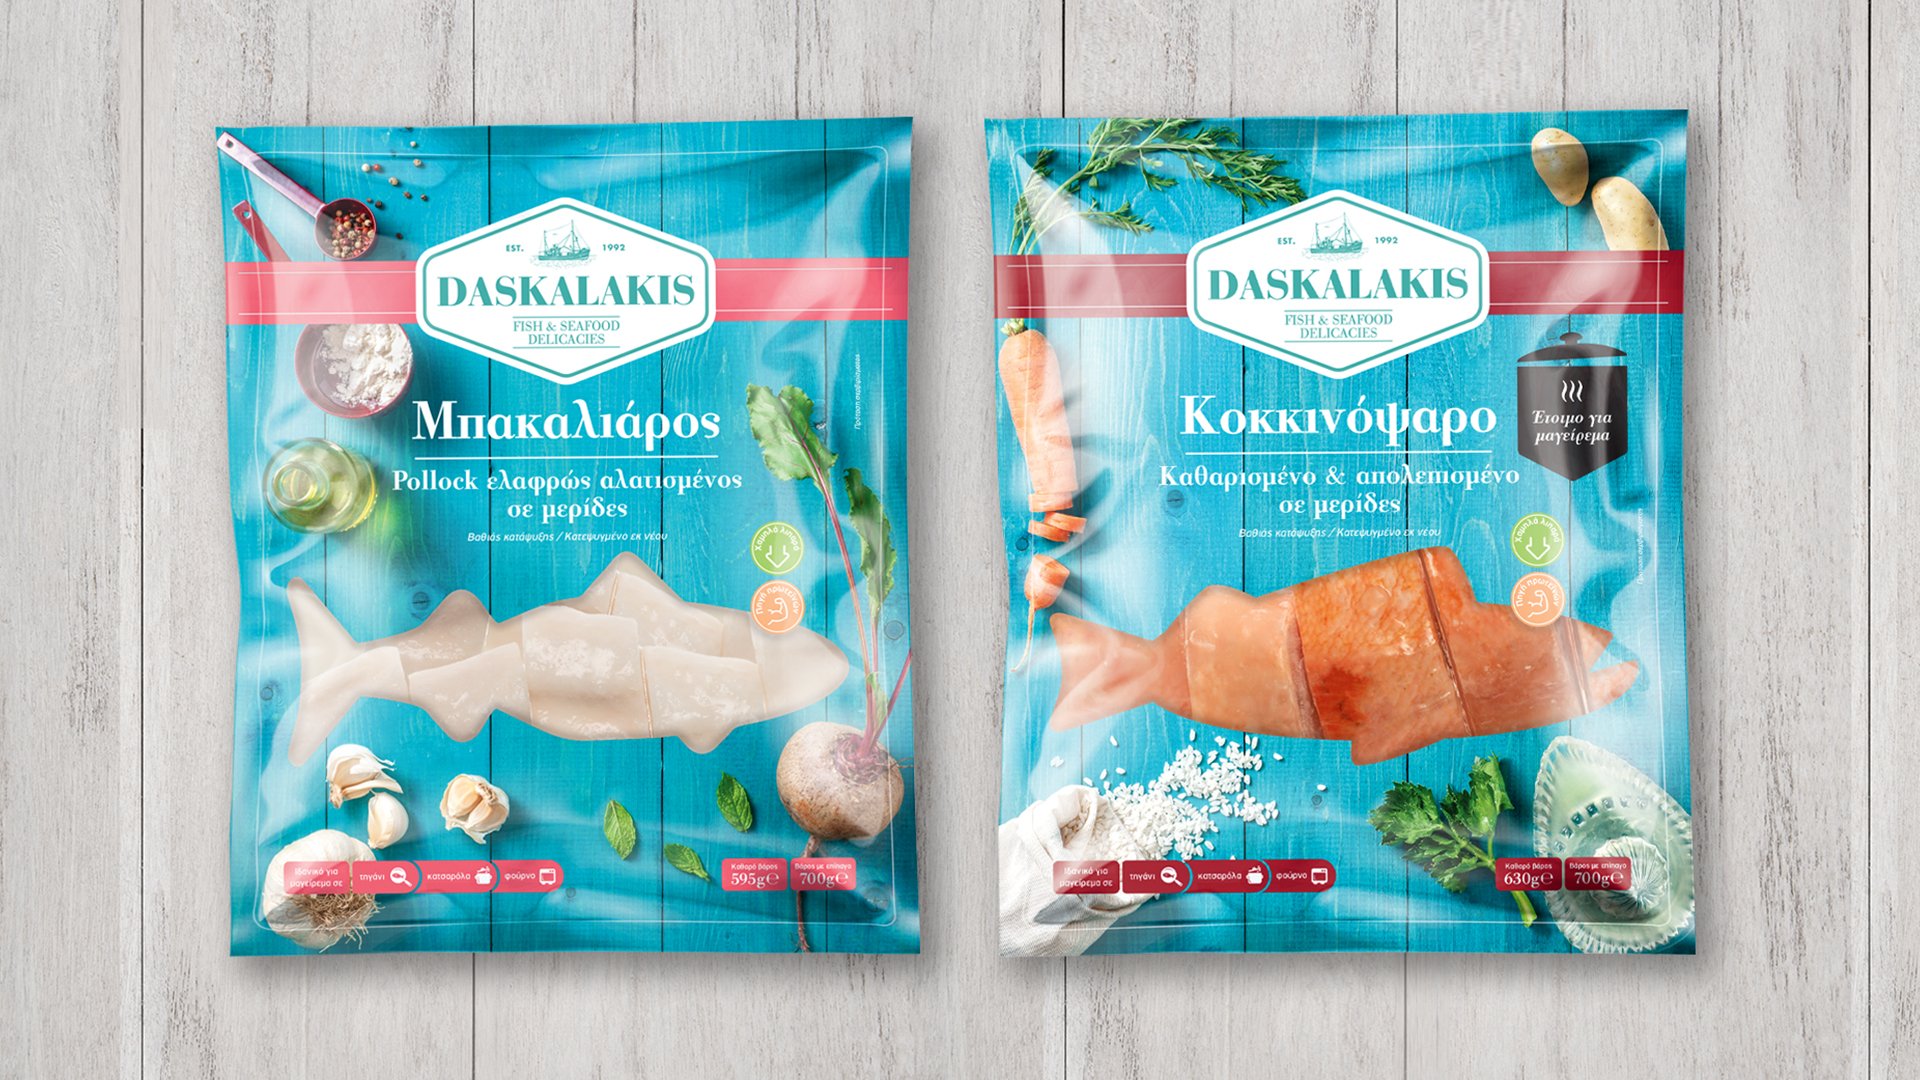 Daskalakis frozen cod and redfish redesigned flowpacks